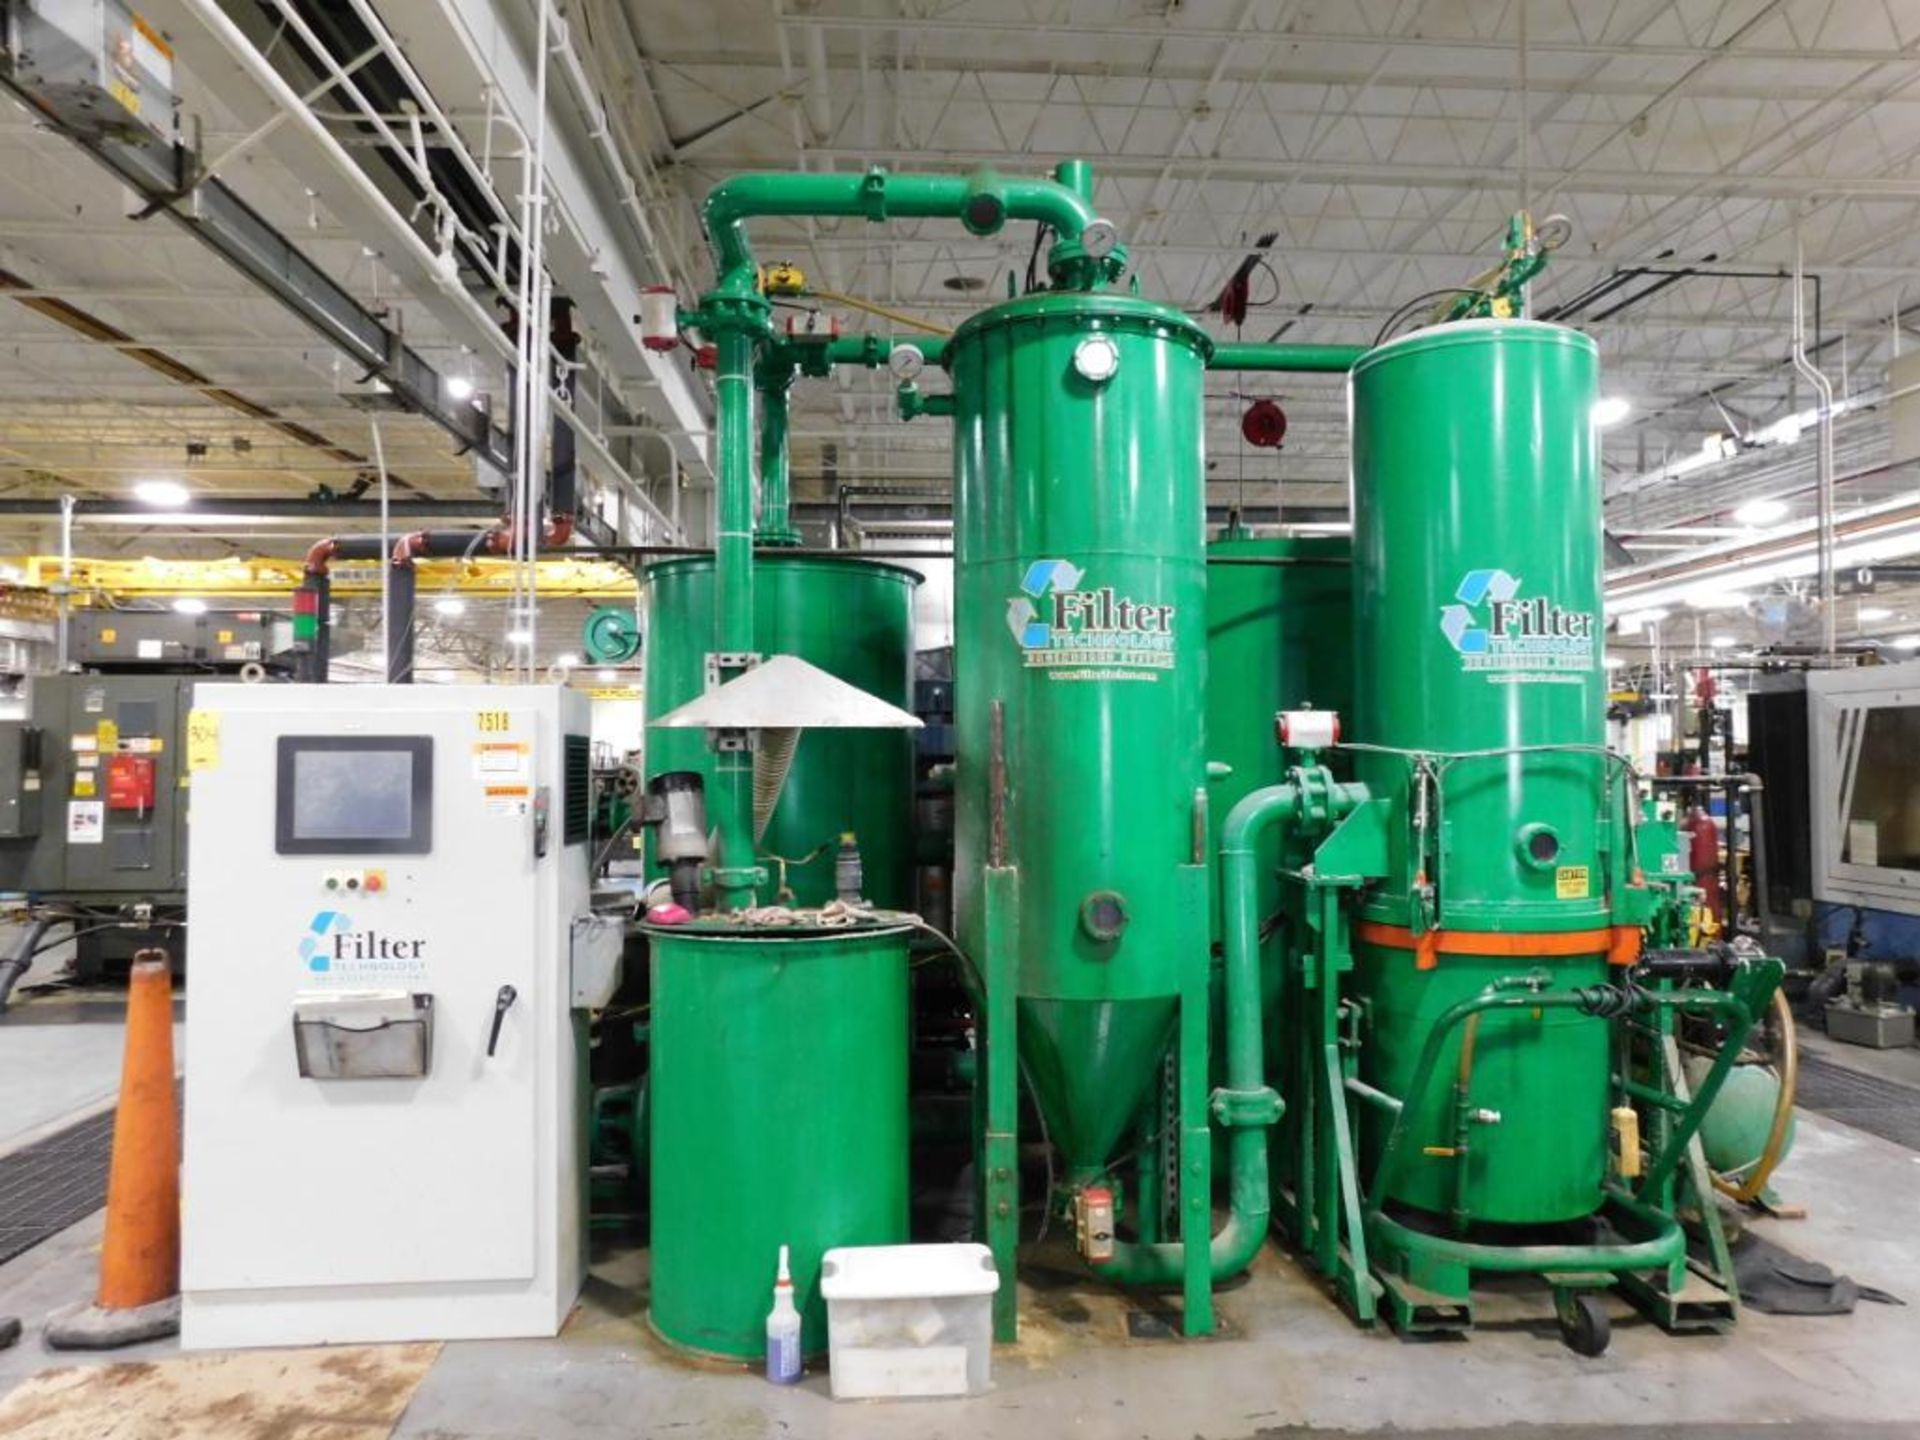 FILTER TECHNOLOGY CENTRAL COOLANT FILTER SYSTEM, WITH DUAL FILTERS, HOLDING TANKS, PUMPS,